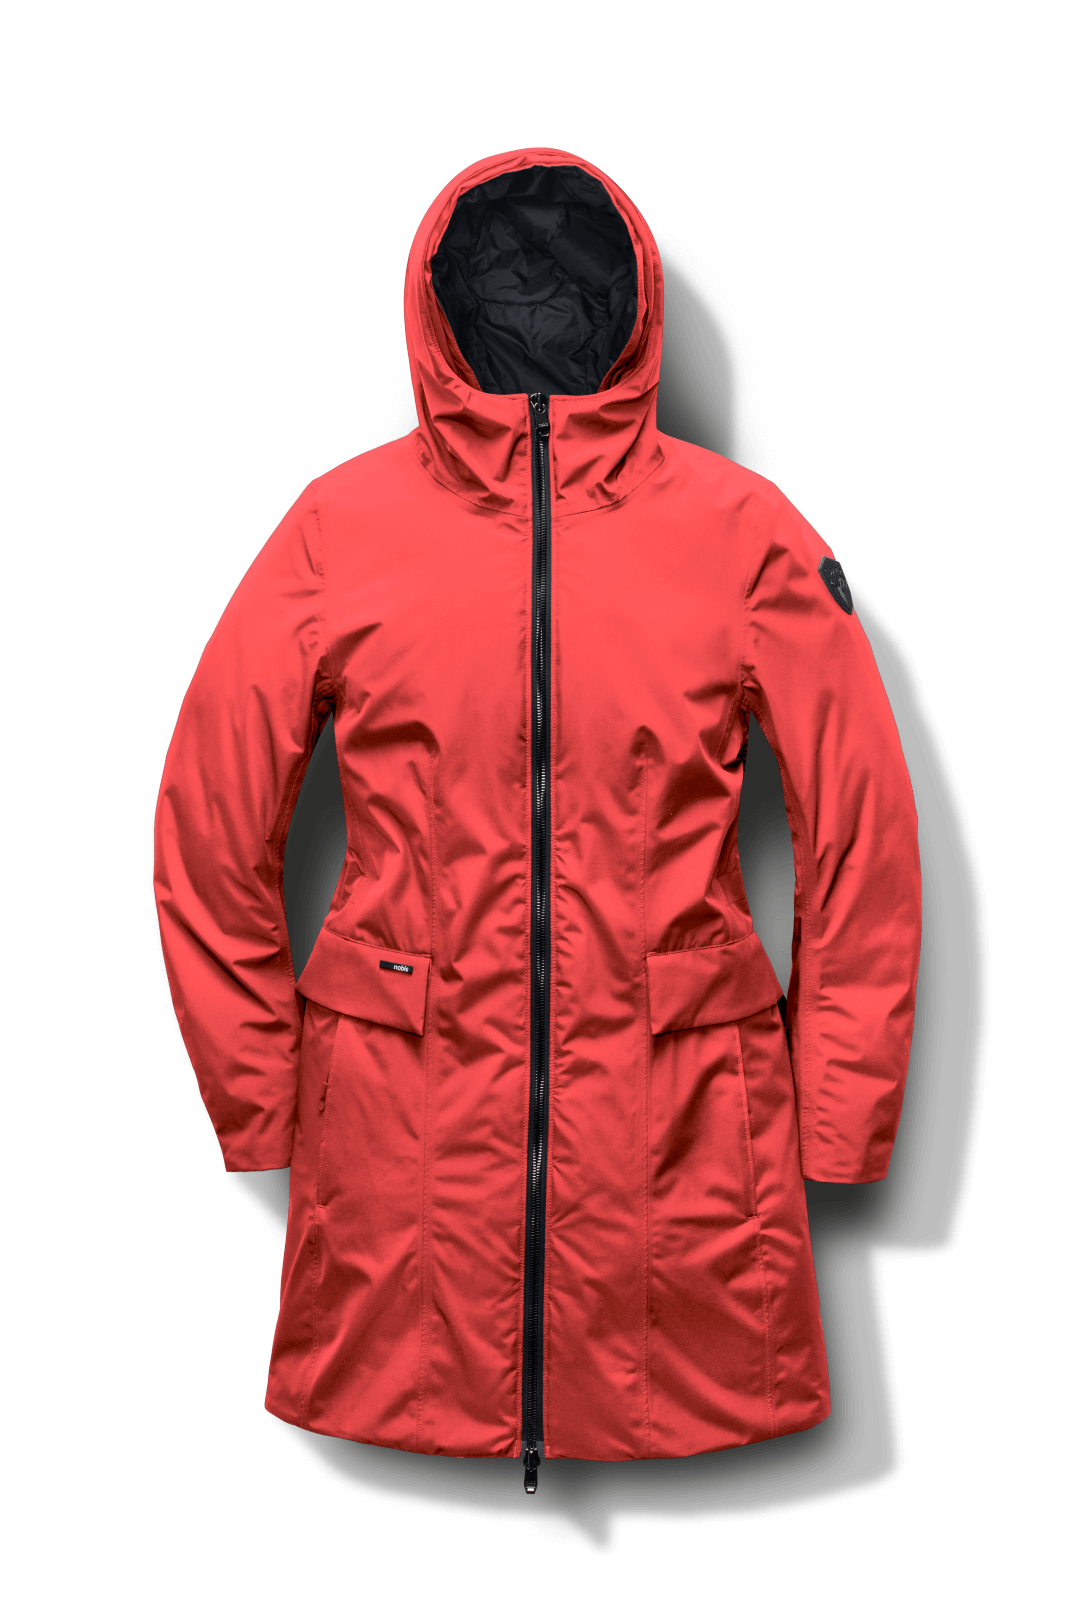 Romeda Ladies Mid Thigh Parka in thigh length, Canadian duck down insulation, non-removable hood with removable fur ruff trim, and two-way front zipper, in Vermillion